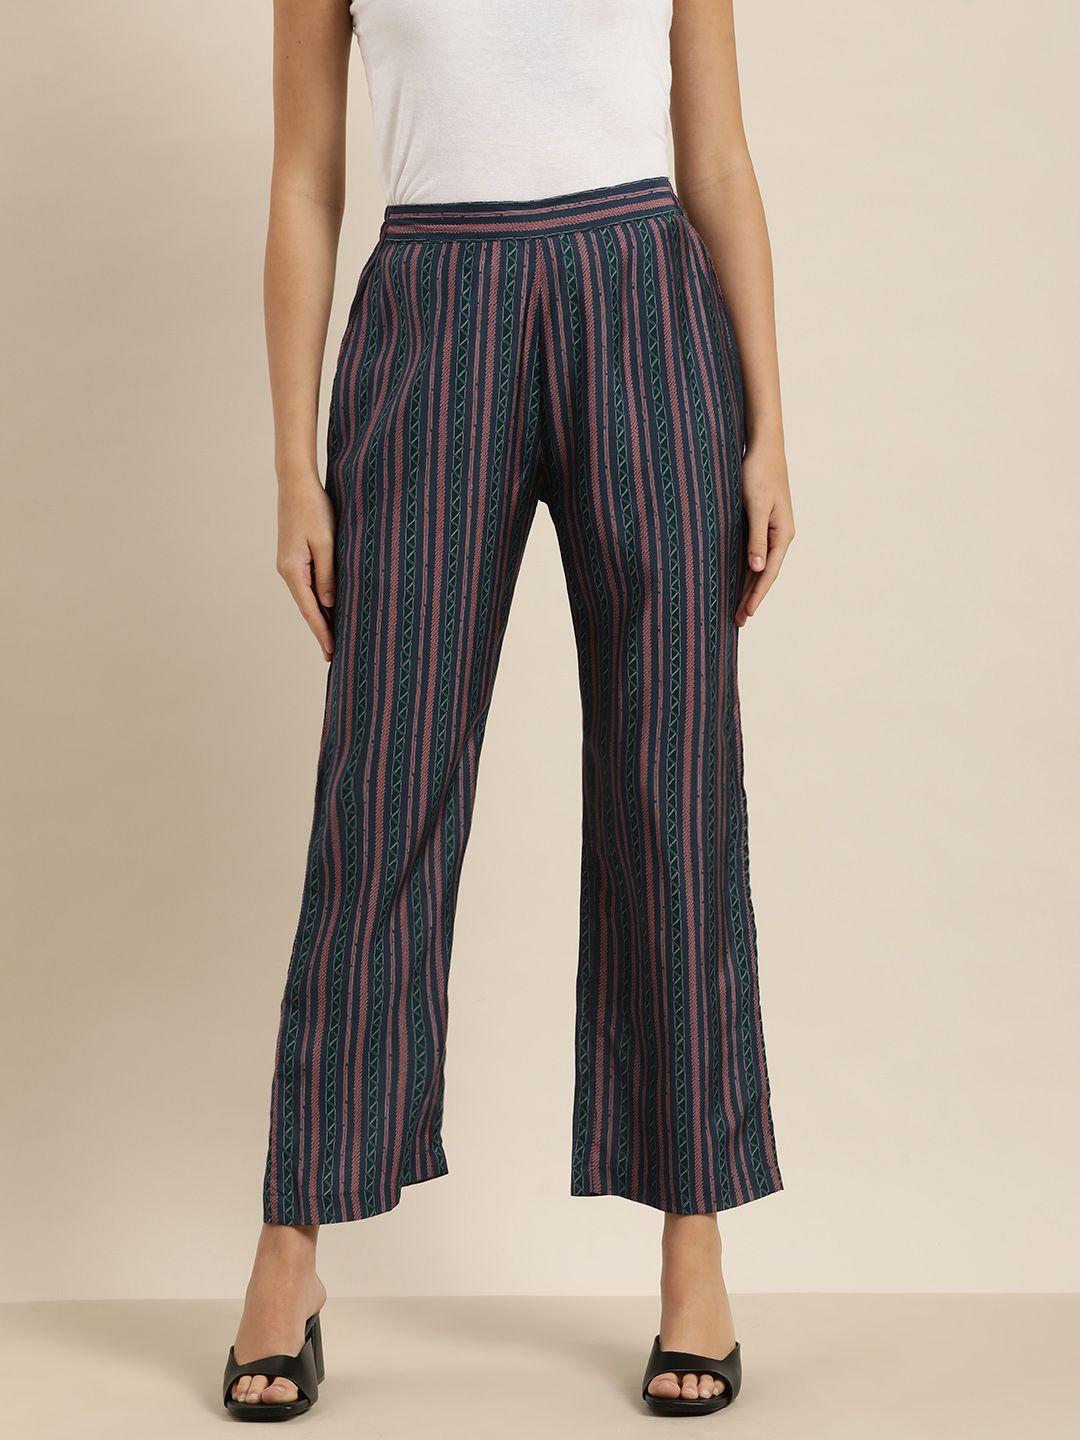 sangria women navy blue & red striped printed trousers